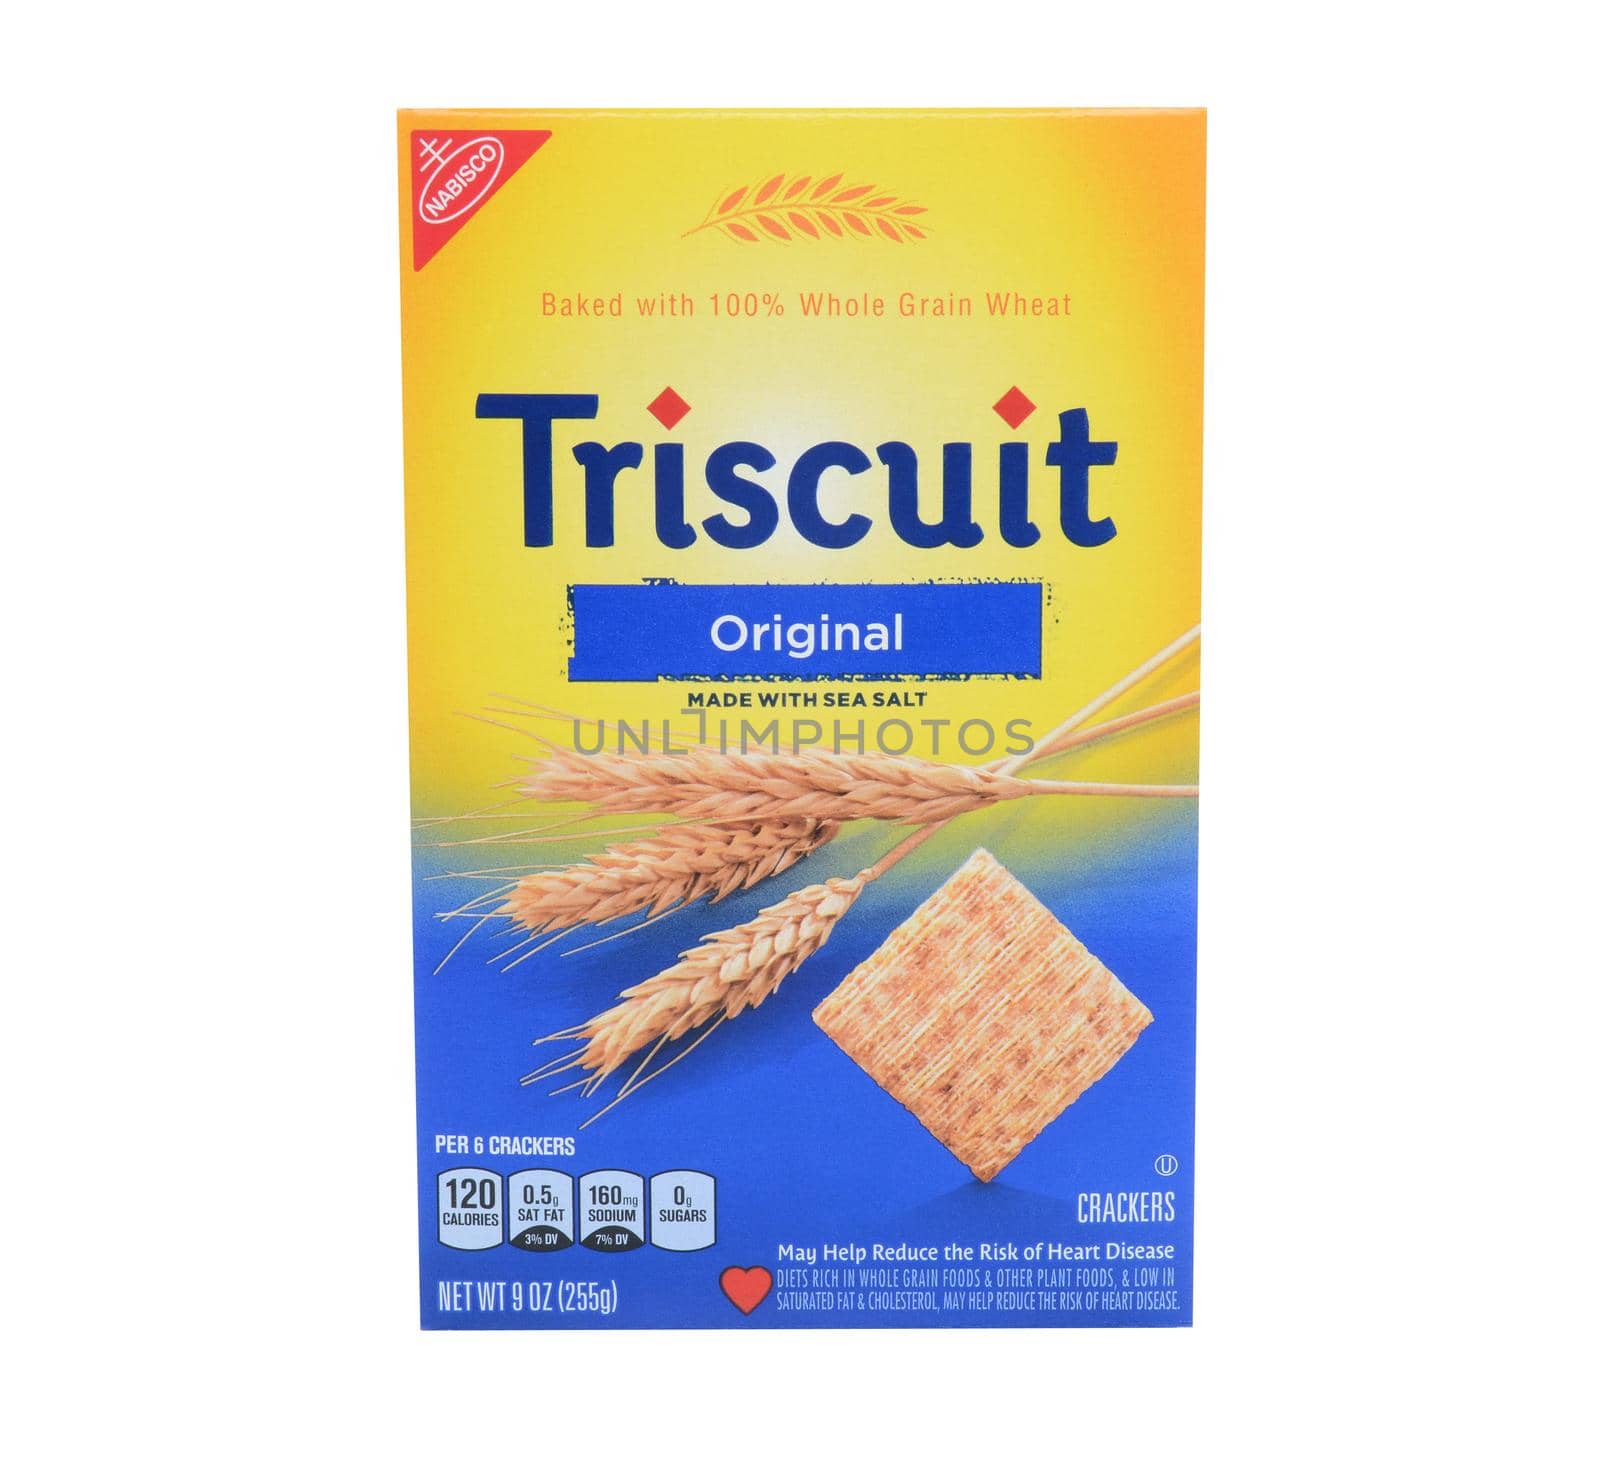 Triscuit Crackers by sCukrov